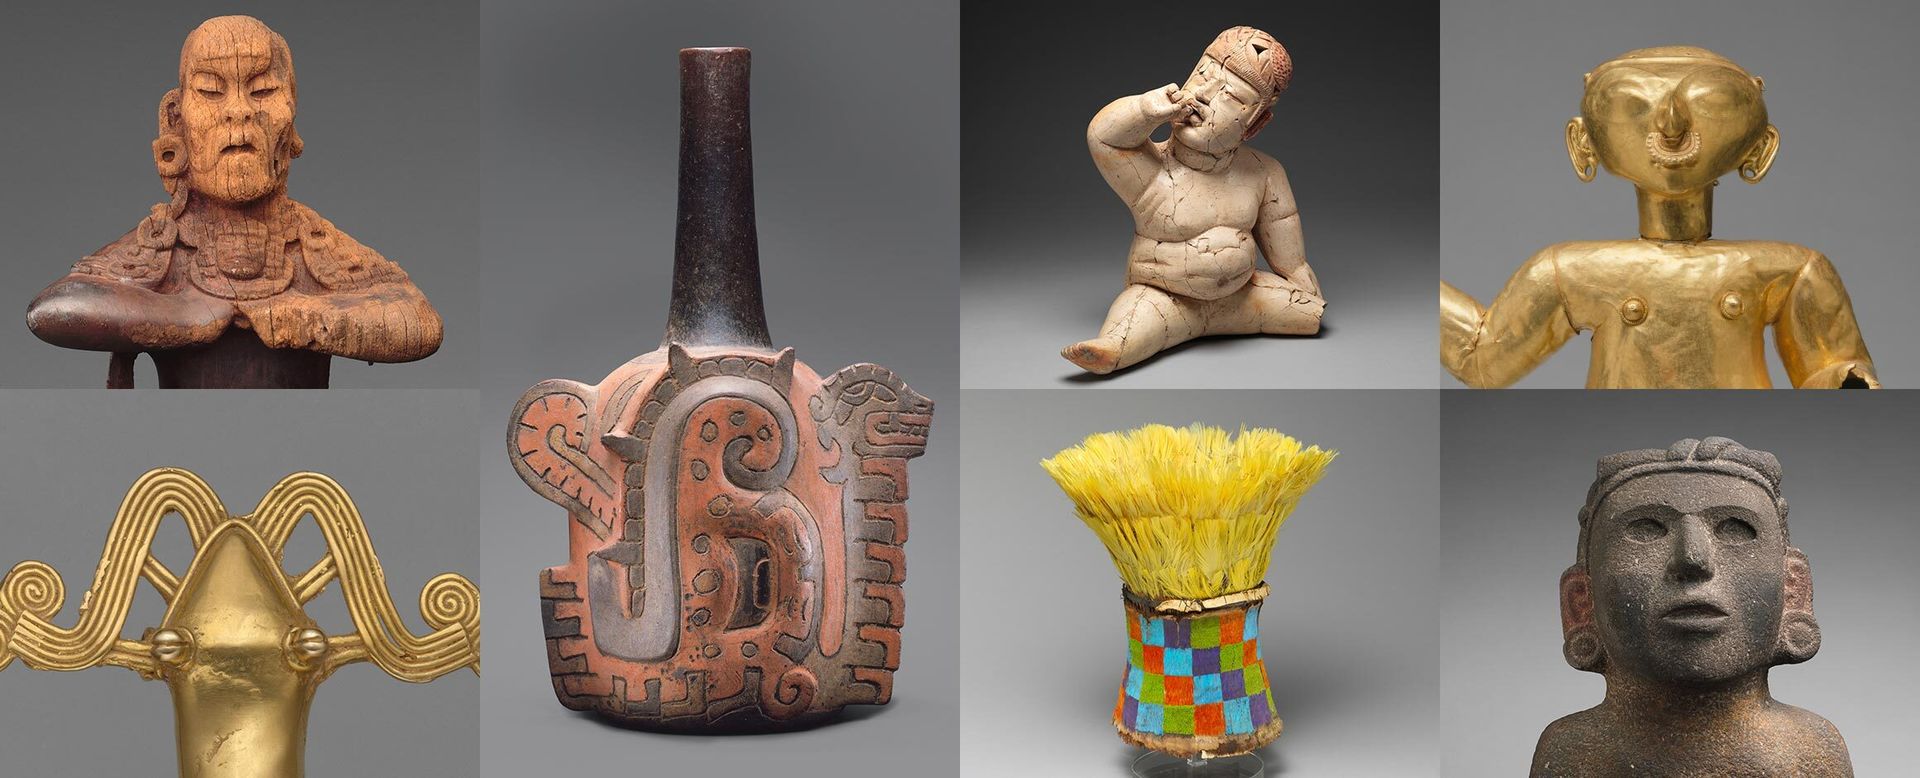 A grid of 7 images of objects from the ancient americas